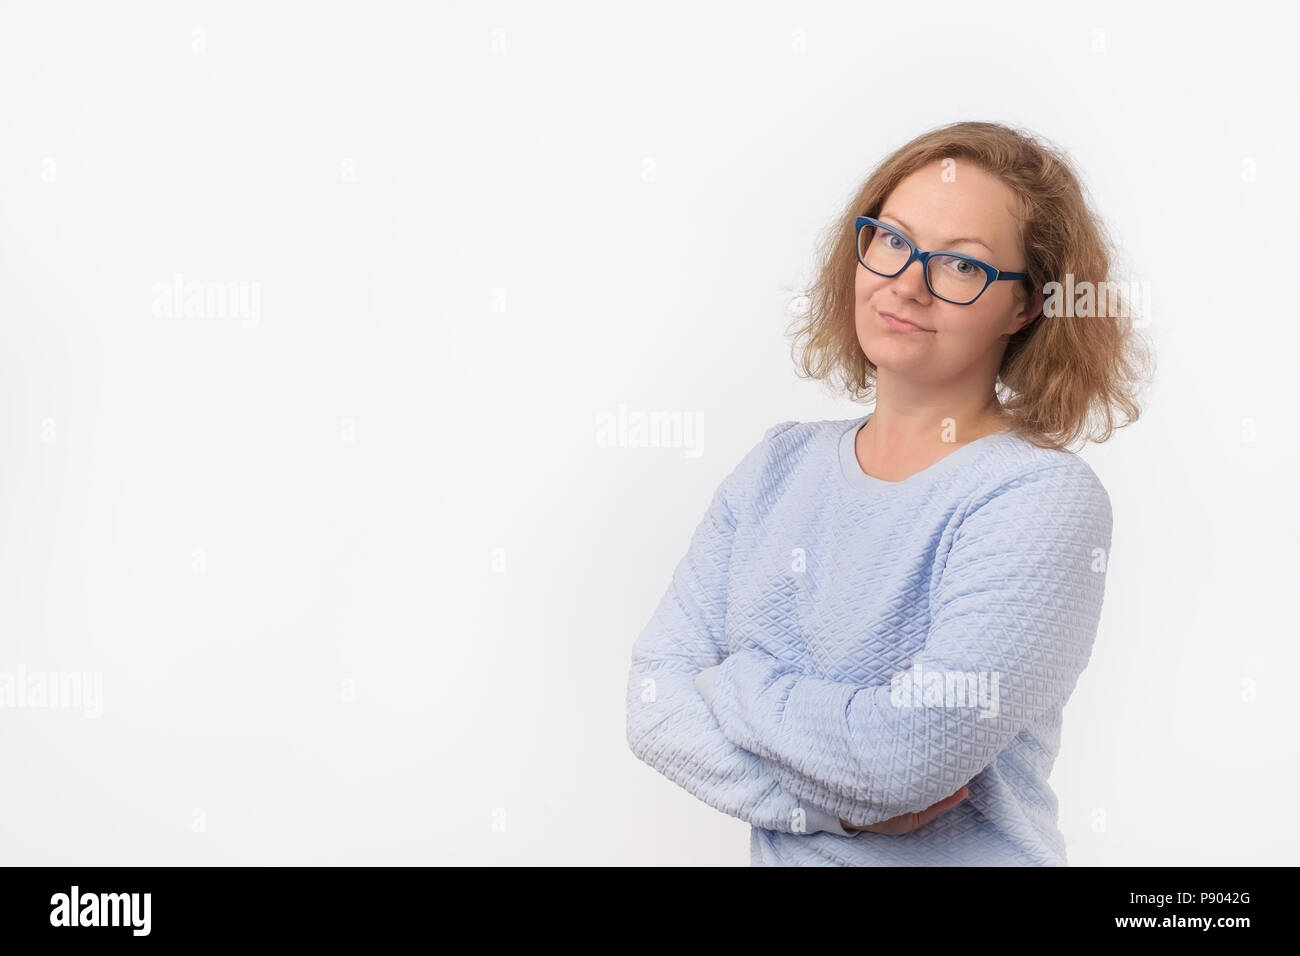 Closeup portrait of skeptical young caucasian woman in blue shirt, woman looking suspicious, some disgust on her face. Stock Photo